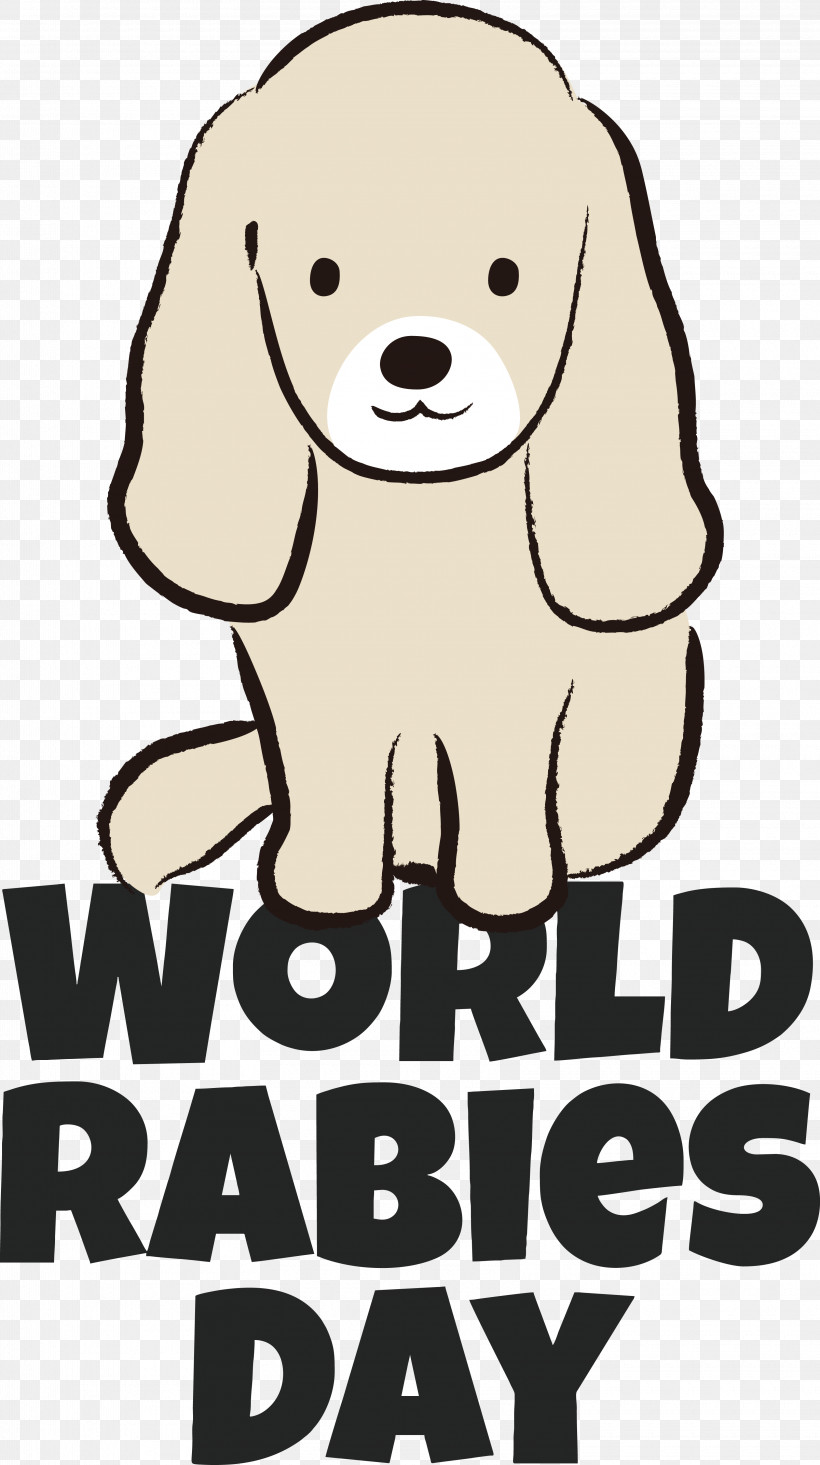 World Rabies Day Dog Health Rabies Control, PNG, 3220x5755px, World Rabies Day, Dog, Health, Rabies Control Download Free